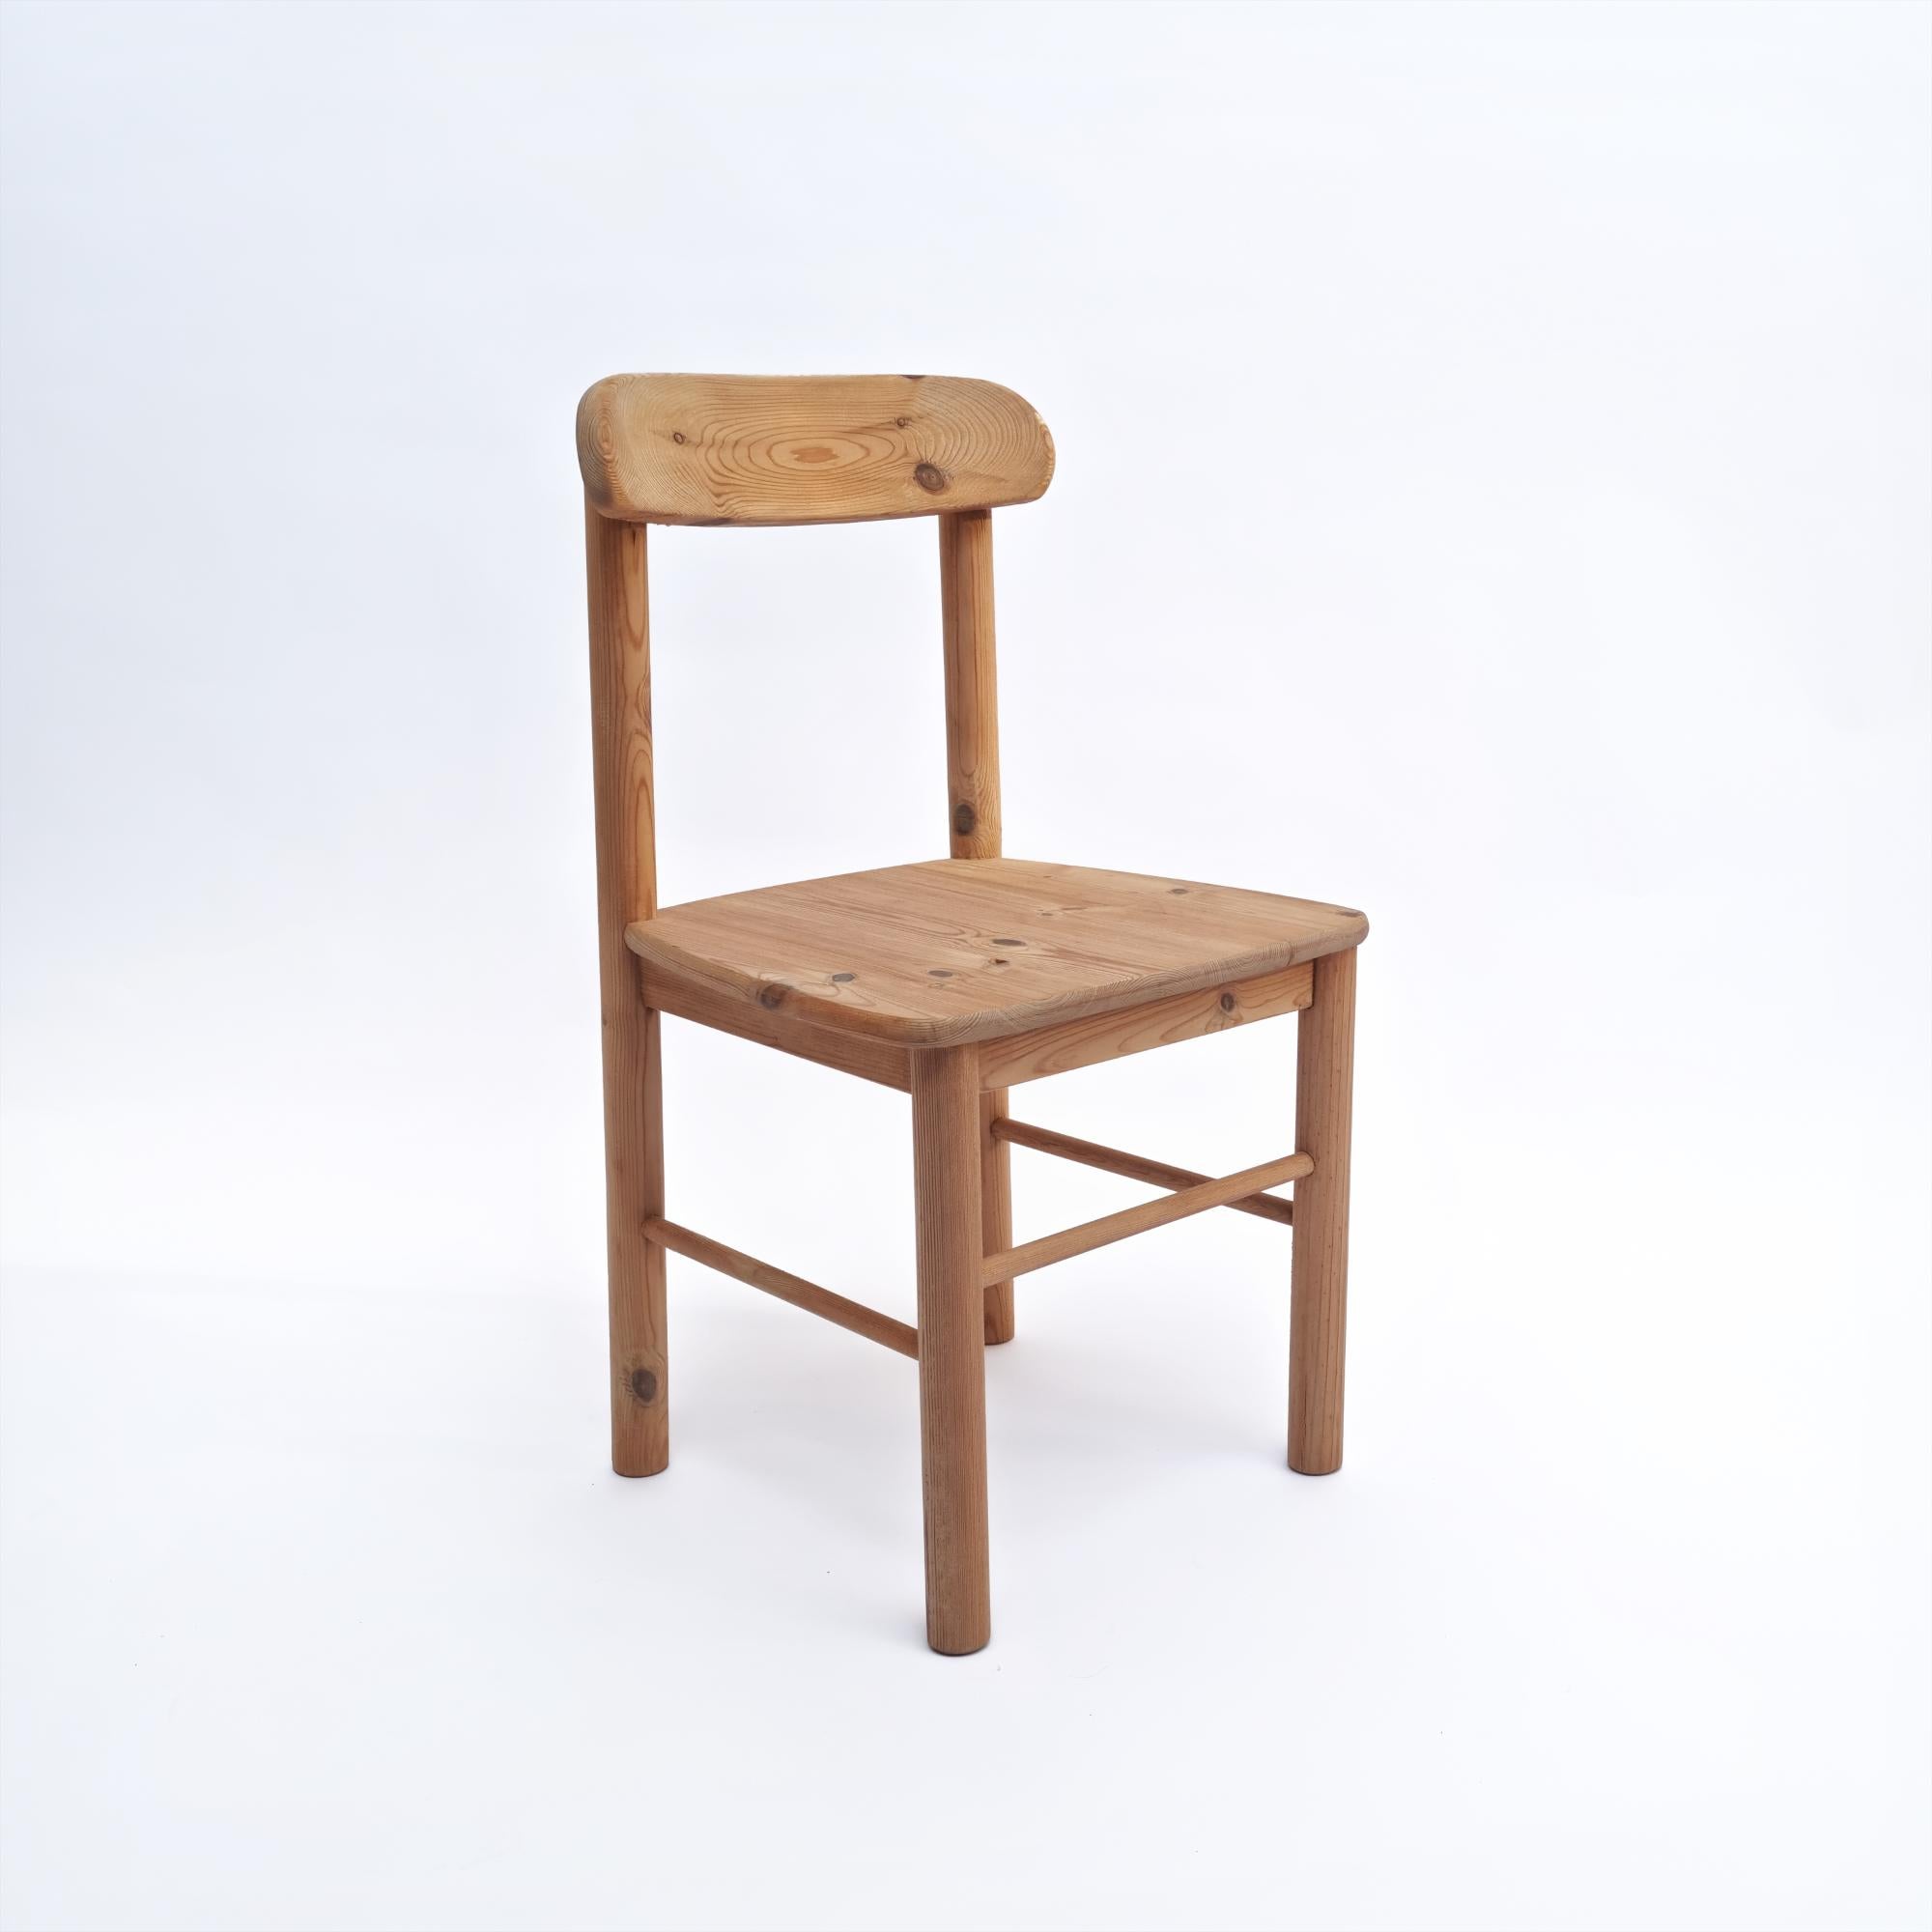 Modernist pine wood chairs made in the same manner as the chairs designed by Rainer Daumiller for Hirtshals Saavaerk. We have not found exactly this version so for now speak in the manner of. The chairs are comfortable and the use of only natural